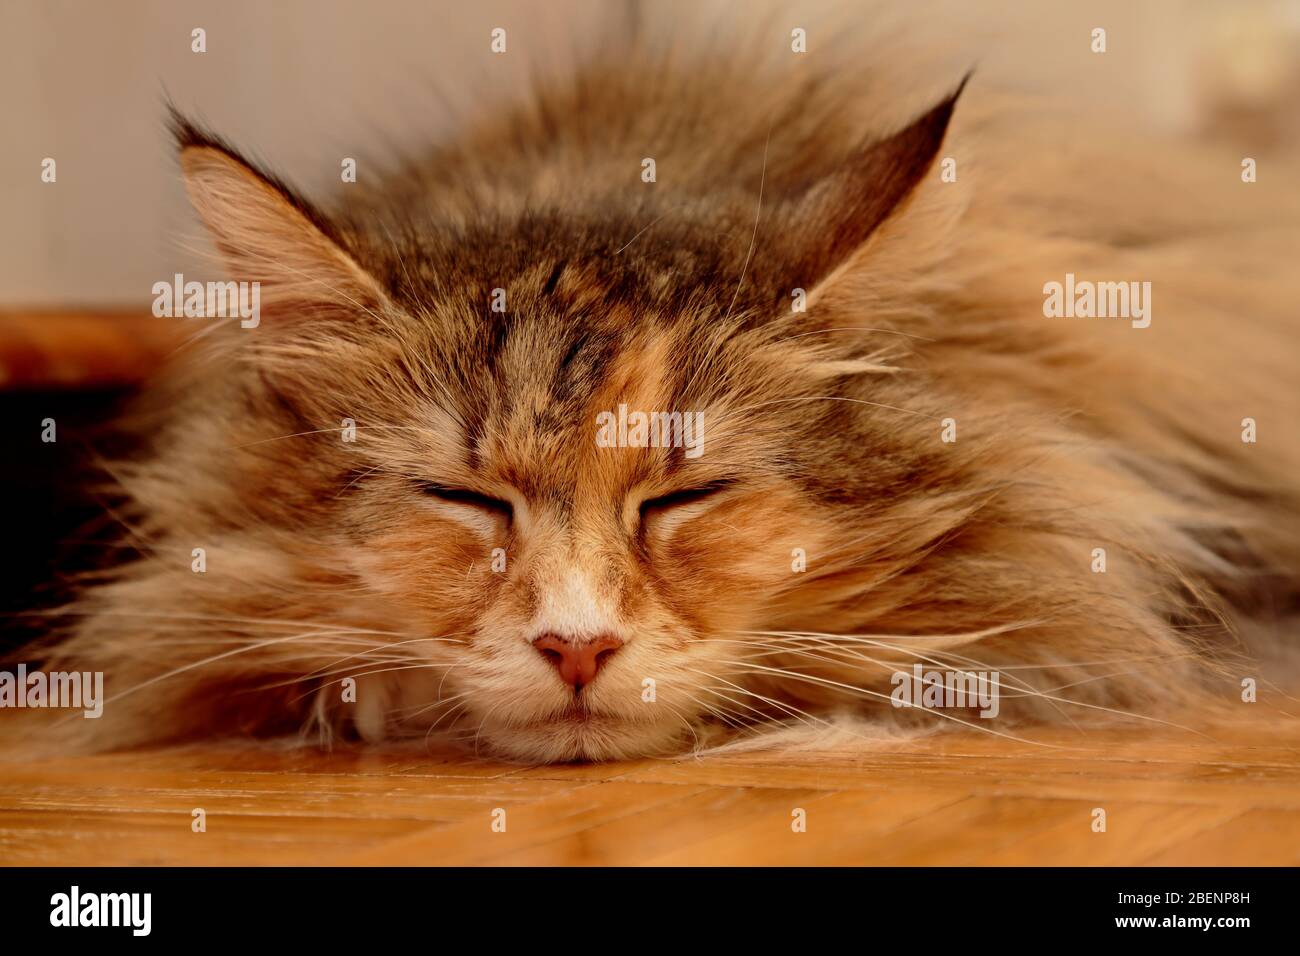 A norwegian forest cat female sleeping on a wooden floor Stock Photo